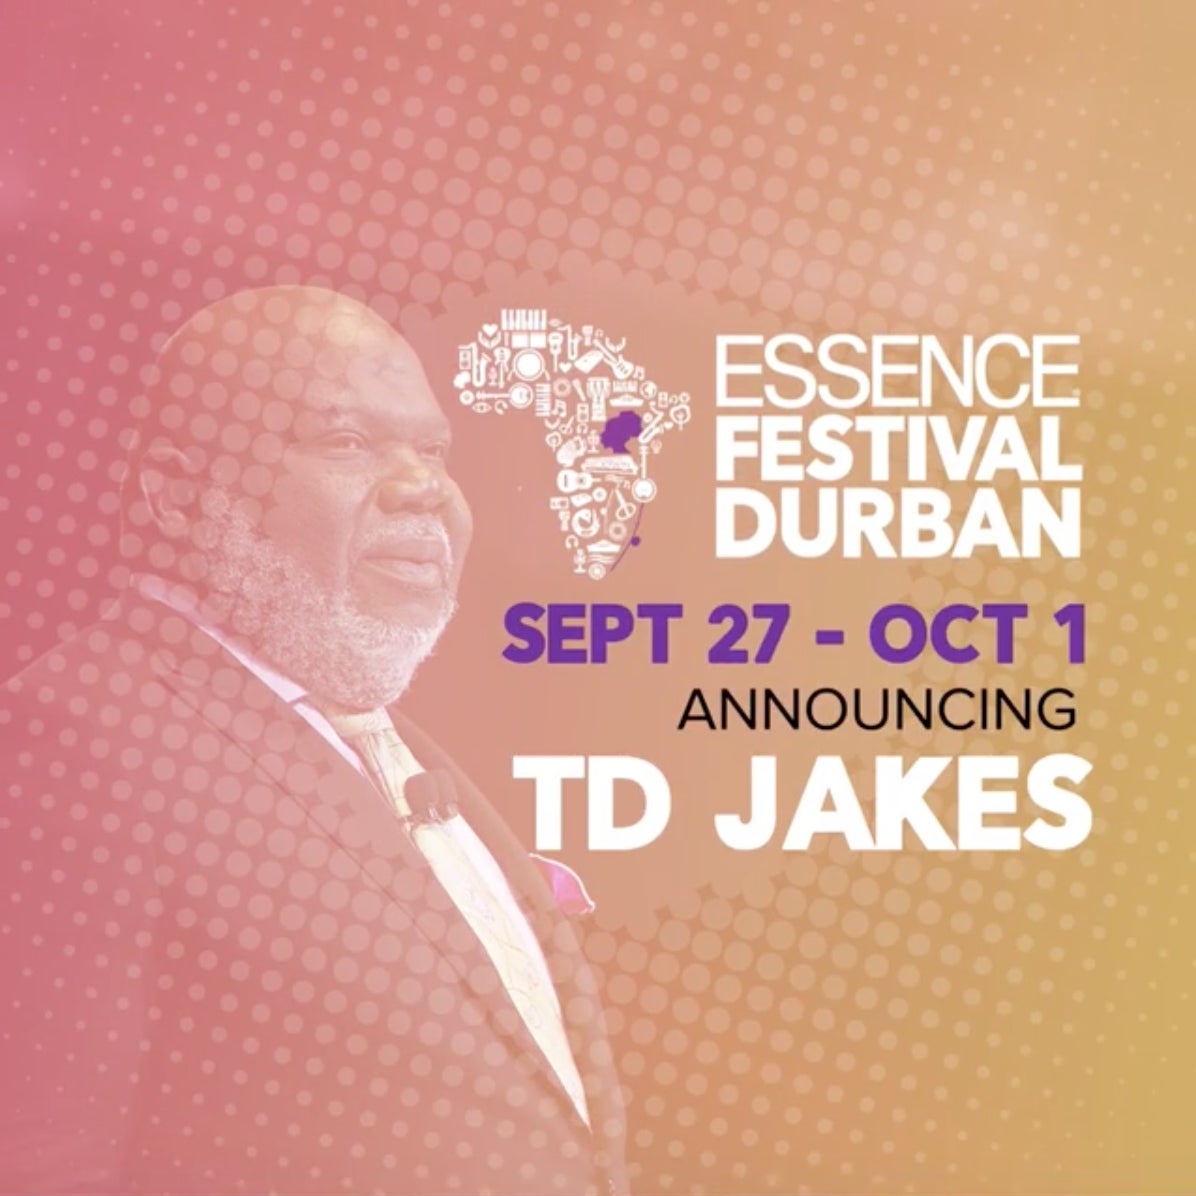 WATCH: Bishop T.D. Jakes Is Personally Inviting You To Join Him At ESSENCE Festival Durban 2017
